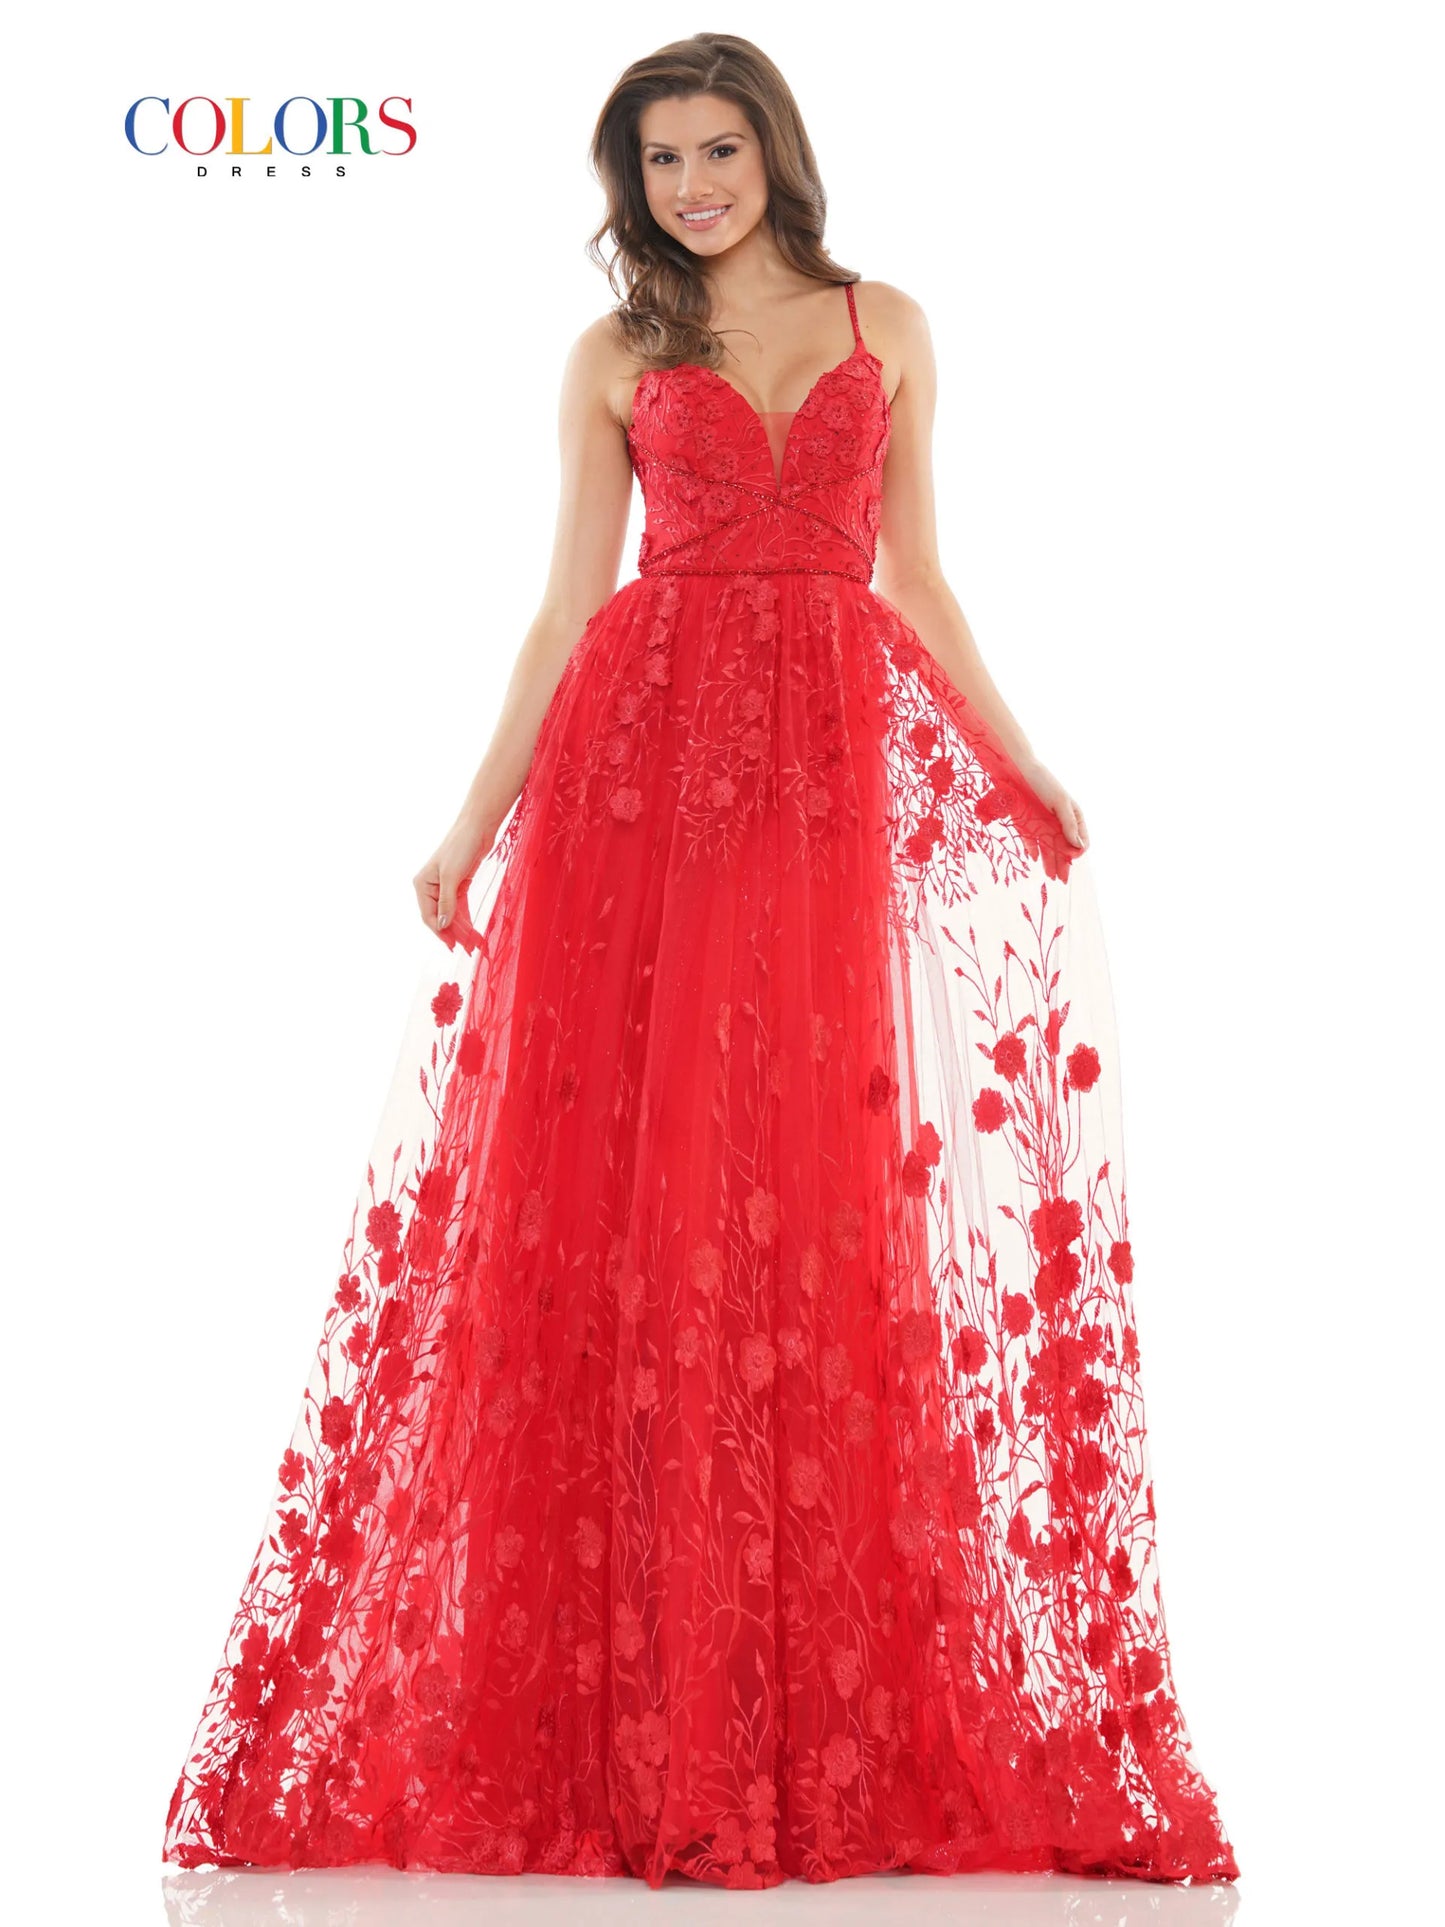 Elevate your prom night style with our Colors Dress 2726. This long prom dress features a corset top, embroidered mesh, and stunning 3D flower appliques. Made for formal events and pageants, this gown will make you stand out with its intricate design and expert craftsmanship.